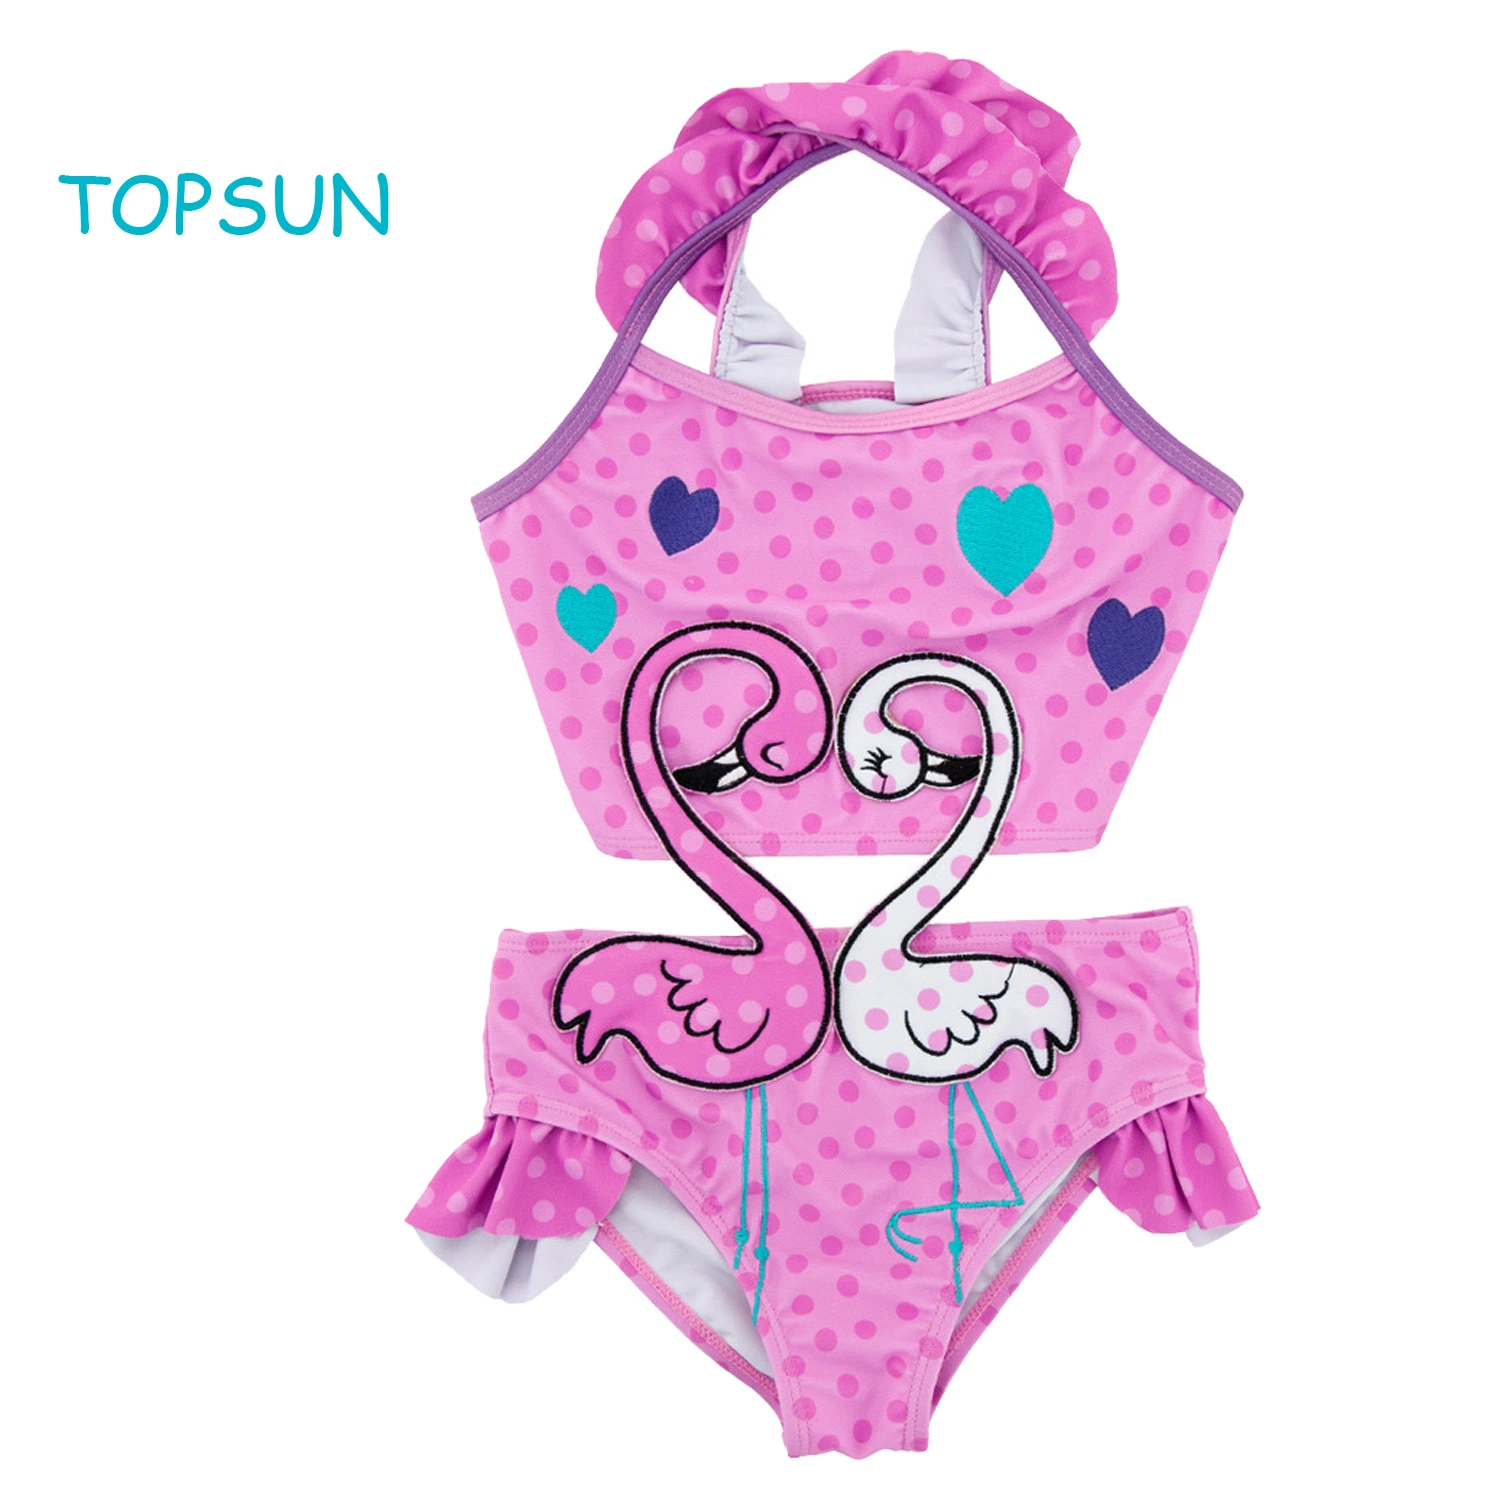 Baby Girl One Piece Swimsuit Printed Bikini Swimwear Beach Bathing Suit with Animals Pattern Printing and Bow Knot Design